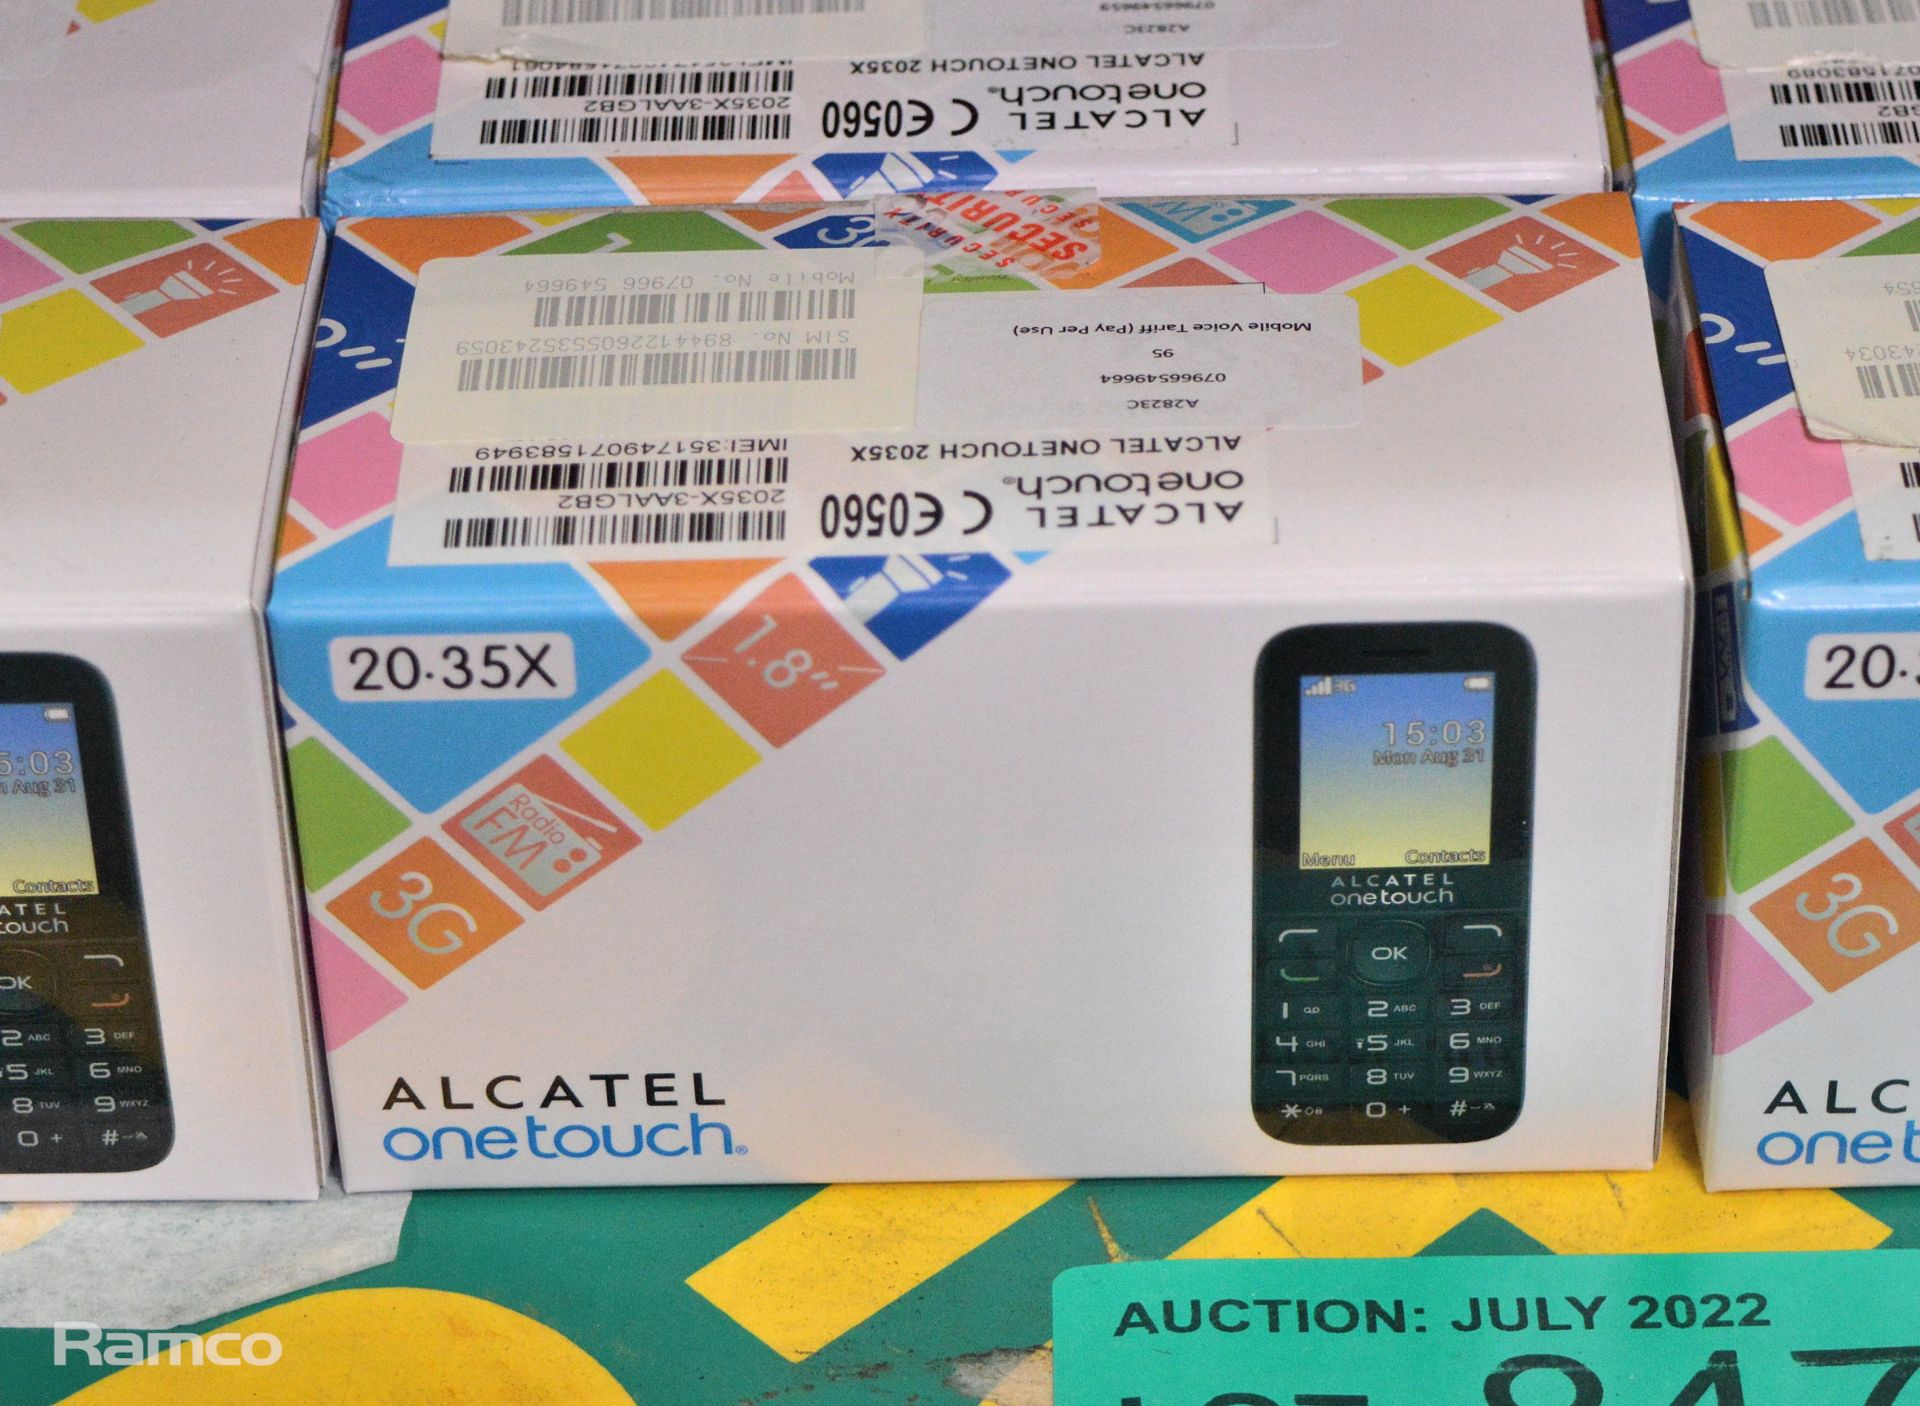 30x Alcatel 2035X One Touch Mobile Phones - Image 2 of 2